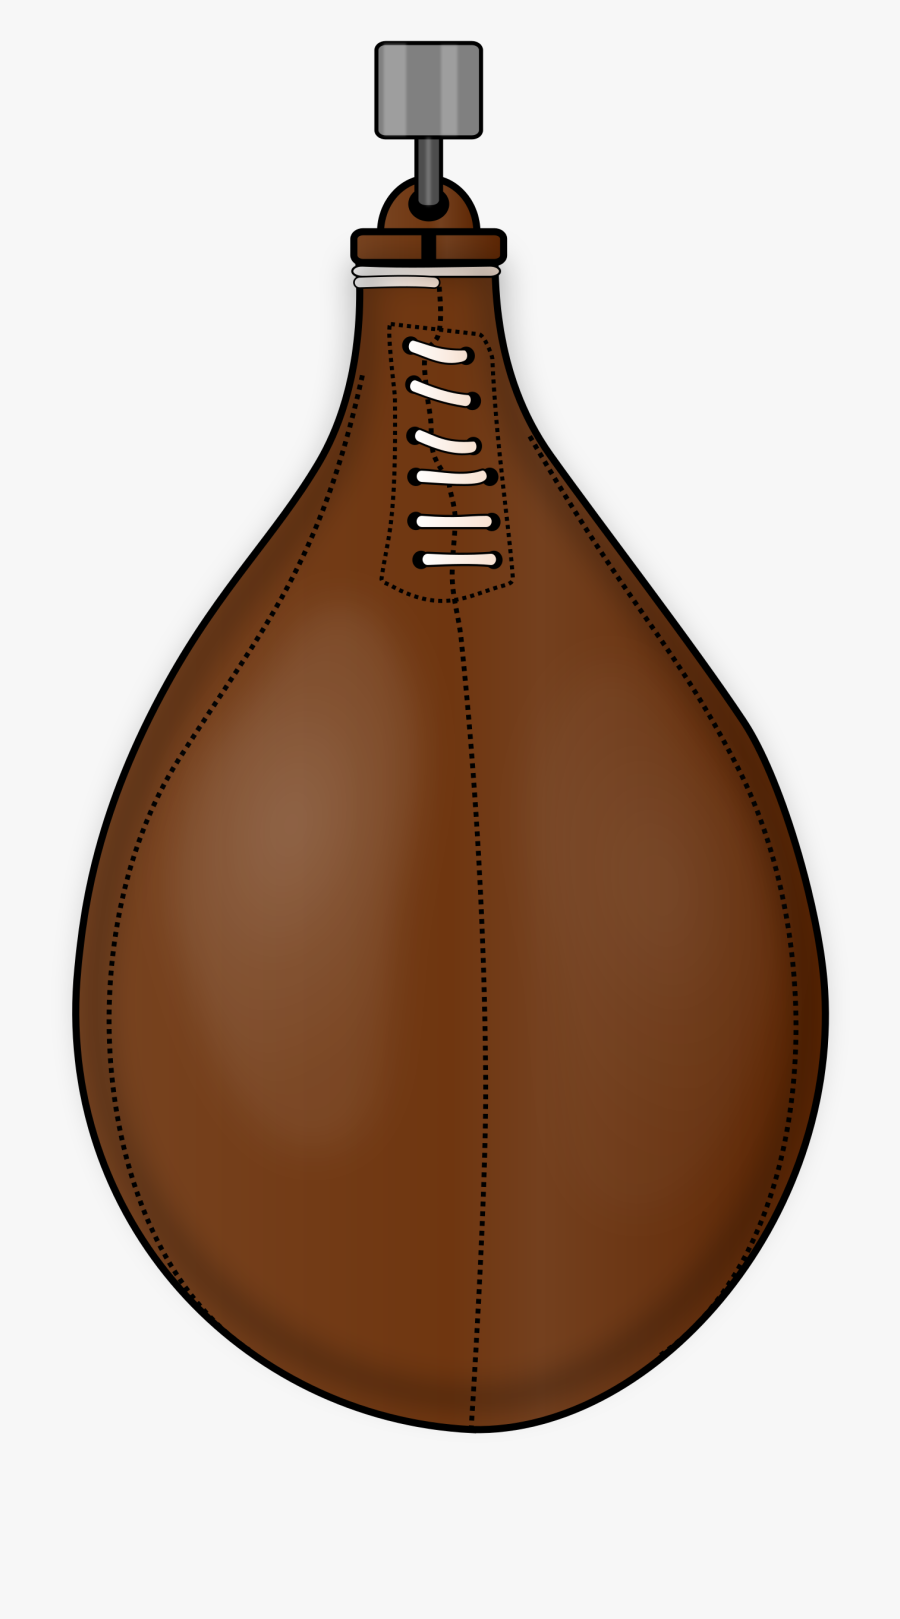 Punching Bag Png Pic - Punching Bag Clipart Transparent, Transparent Clipart